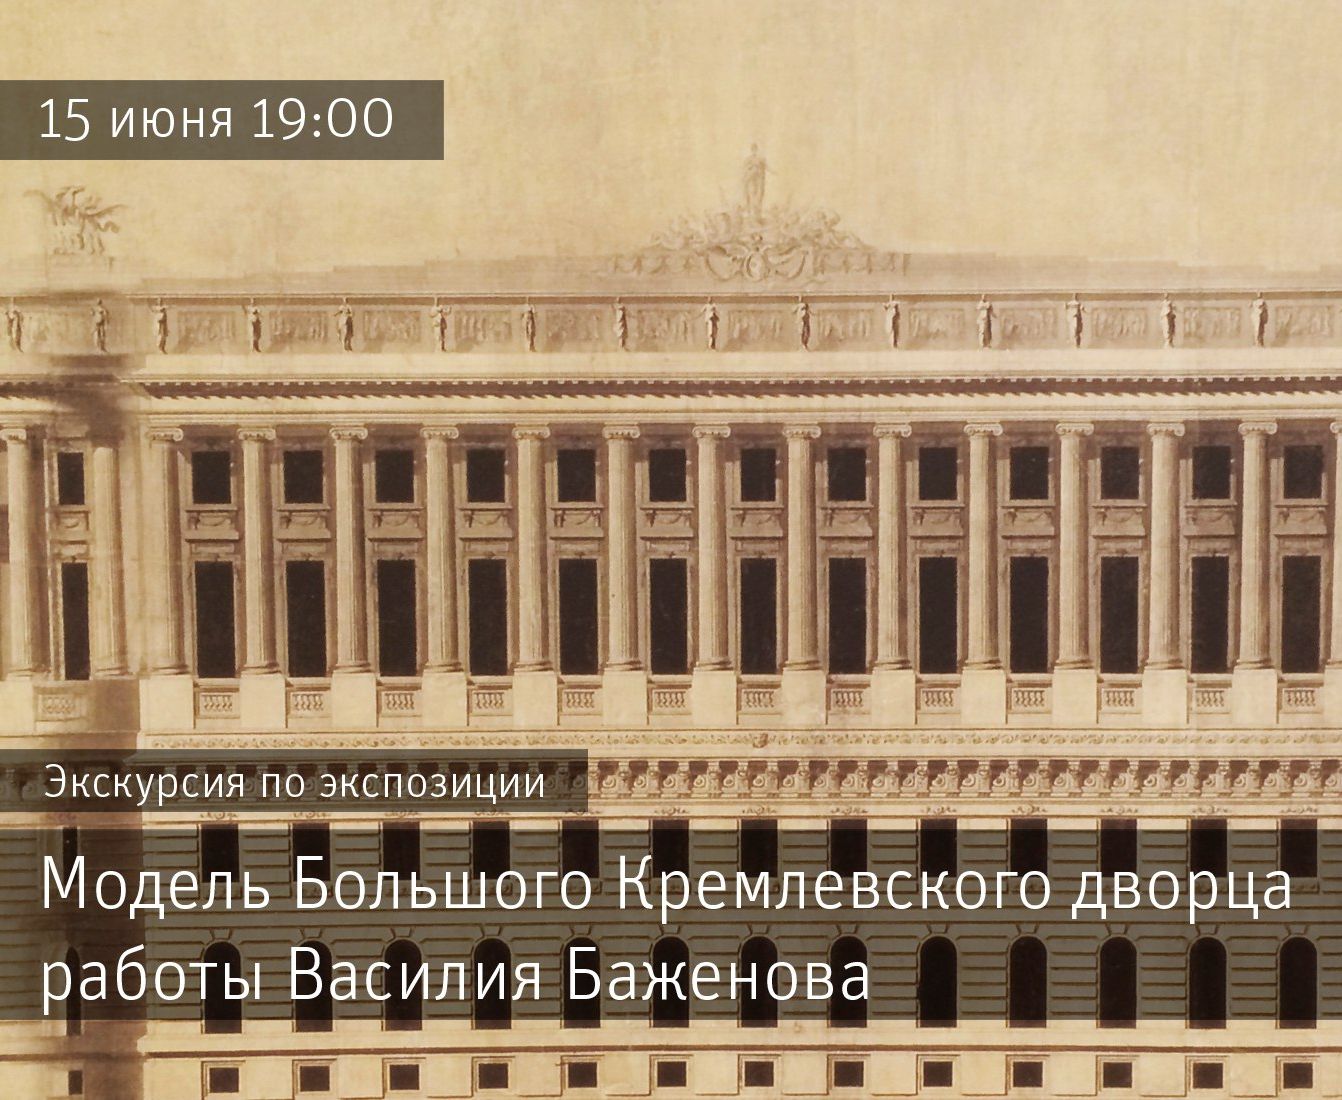 Excursion to the exhibition «Model of the Grand Kremlin Palace by Vasily Bazhenov»